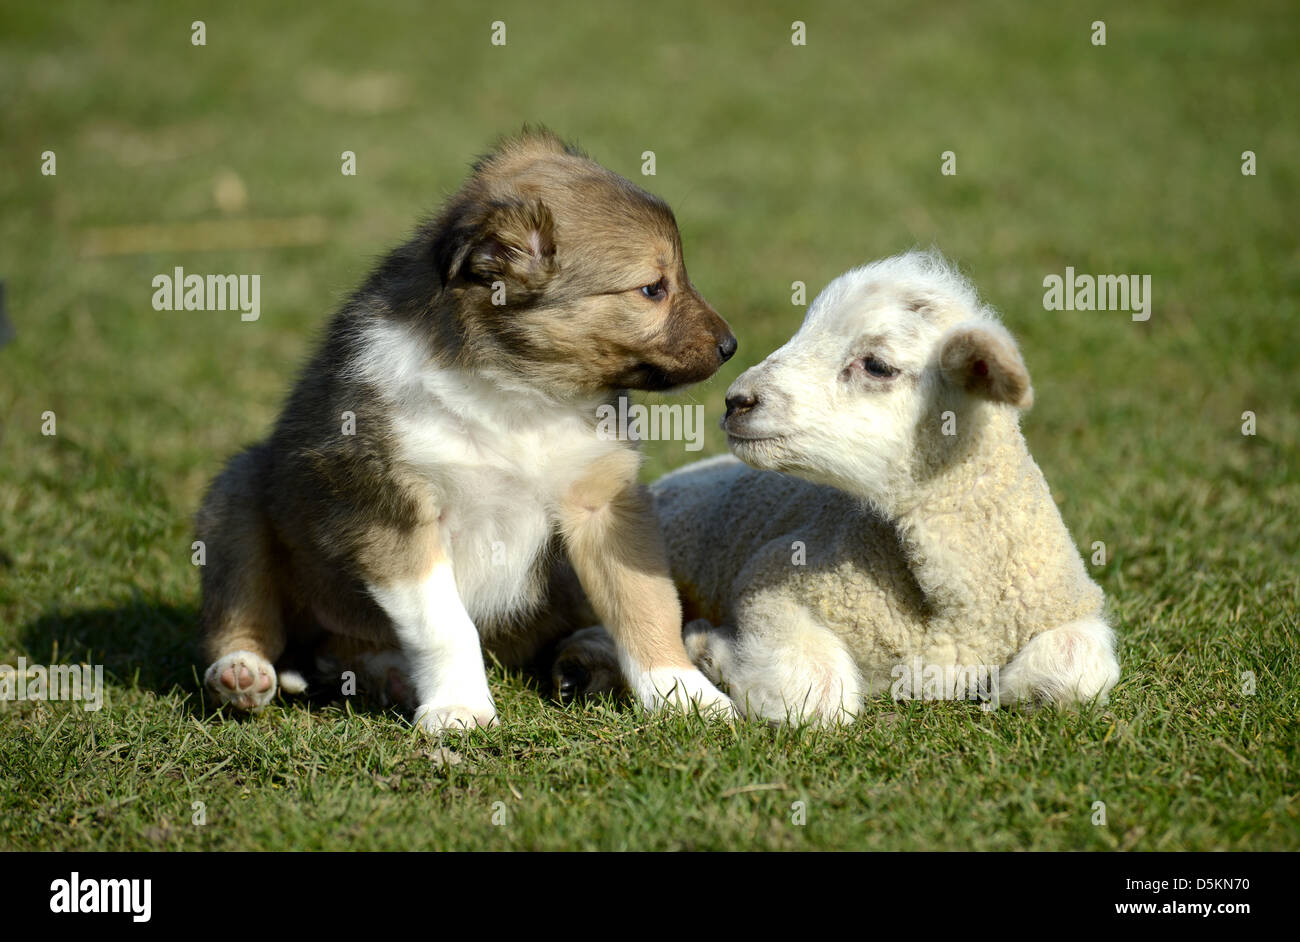 Puppy and lamb play together Stock Photo